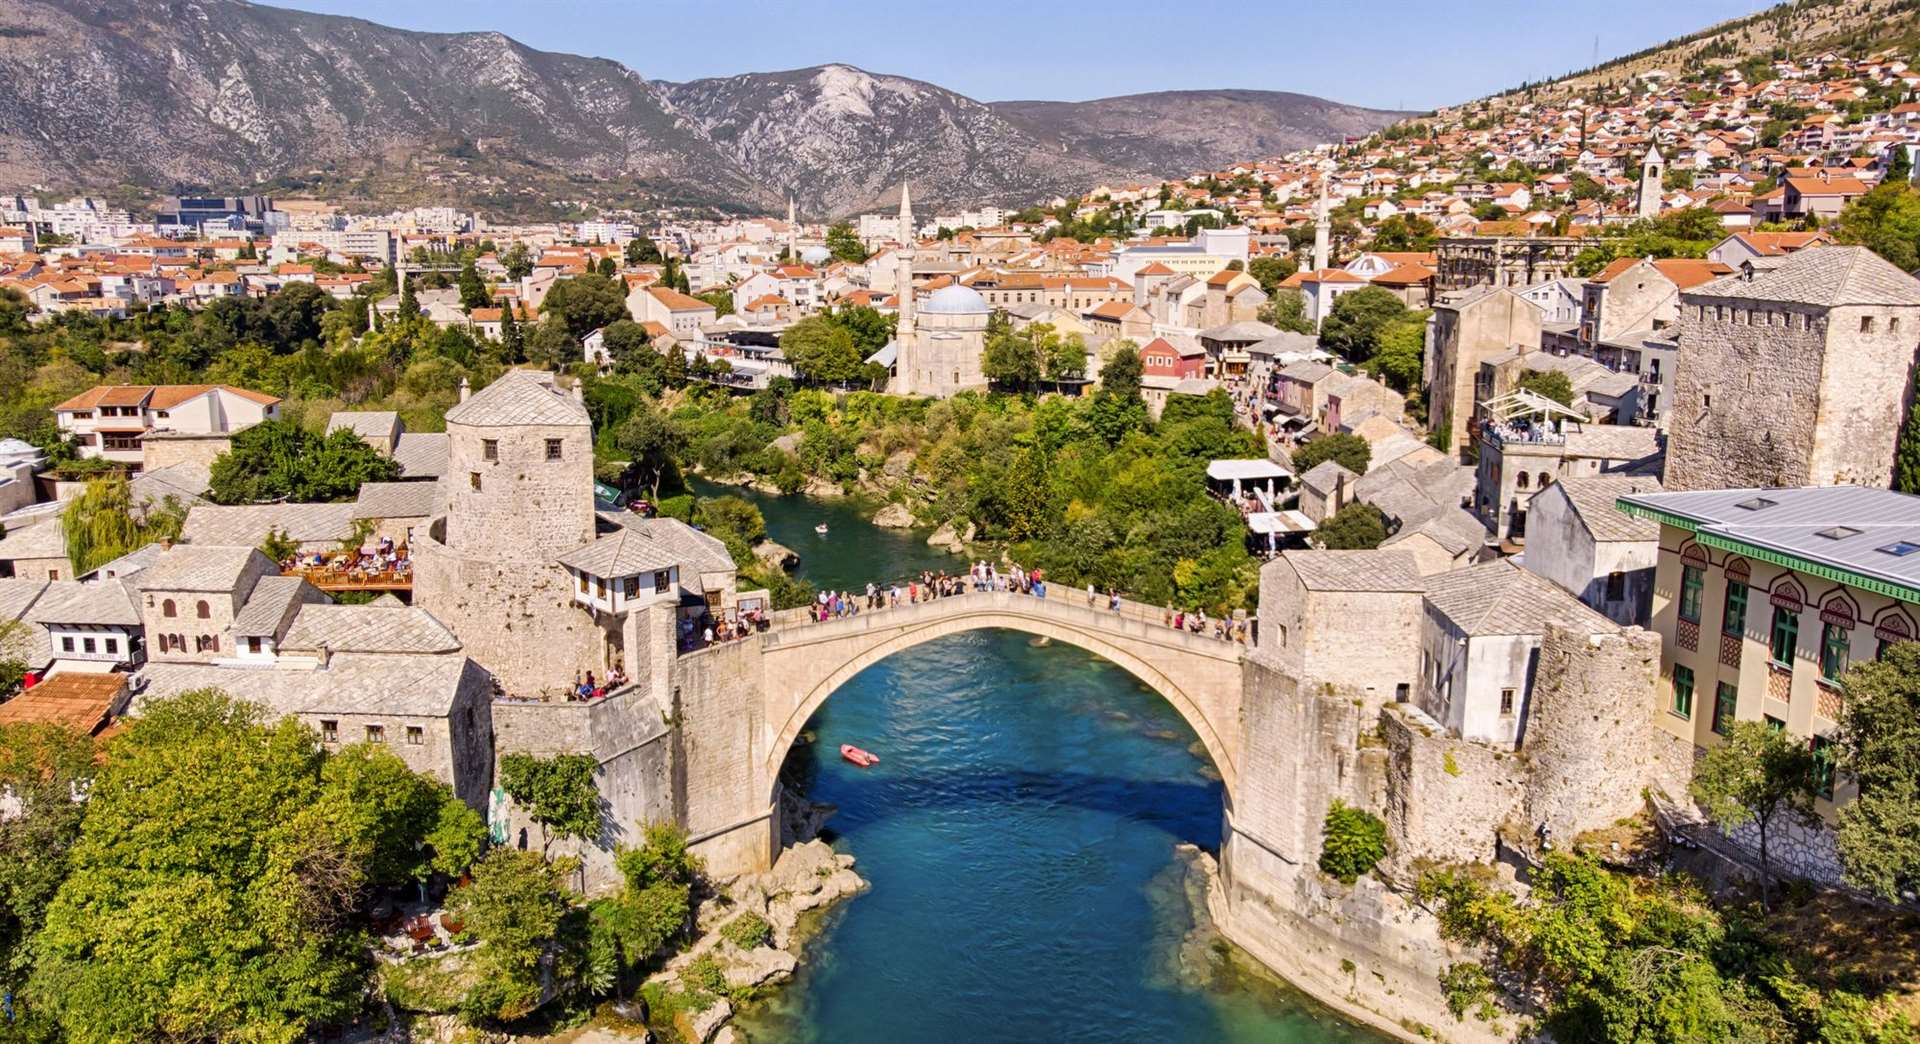 Stari Most, also known as Mostar Bridge, is a rebuilt 16th-century Ottoman bridge in the city of Mostar that crosses a river and connects the two parts of the city.